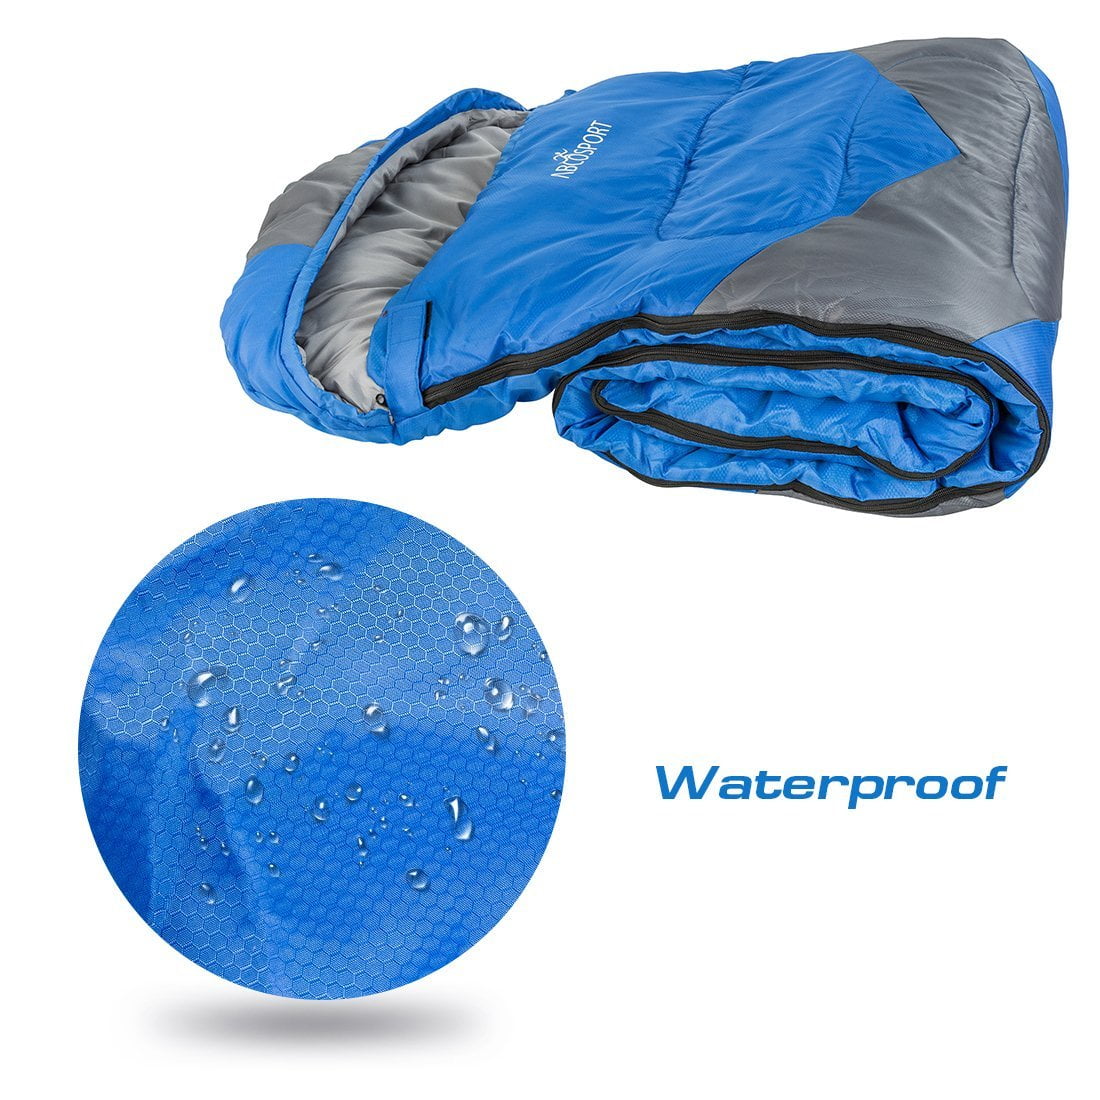 HEWOLF Double Sleeping Bags for Adults Lightweight Waterproof Envelope Sleeping Bag Compact 4 Season Sleeping Bag with Compression Sack for Camping Hiking 220×145cm 